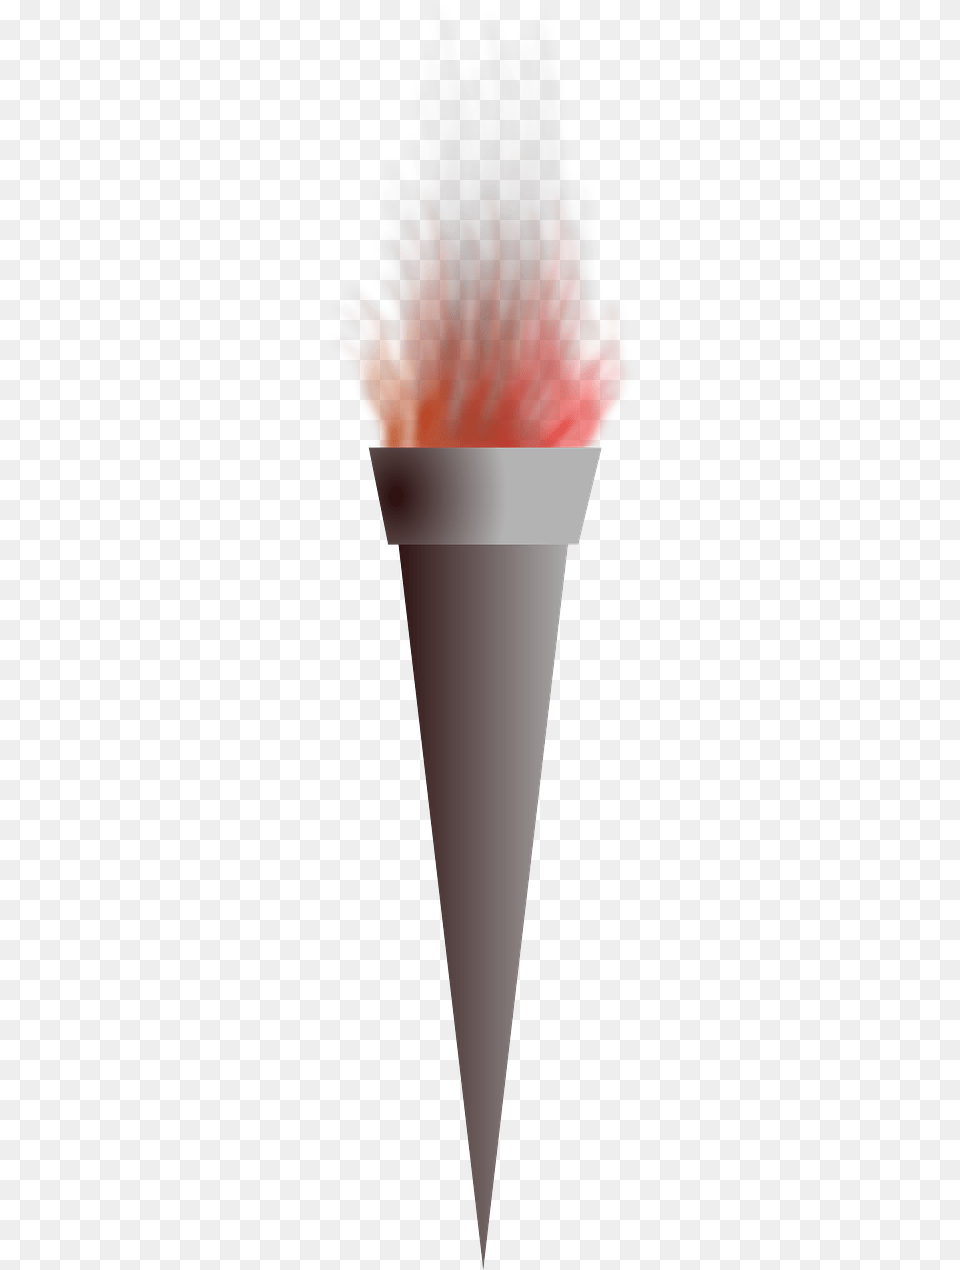 Torch Fire Flame Picture Toothbrush, Light, Cone Png